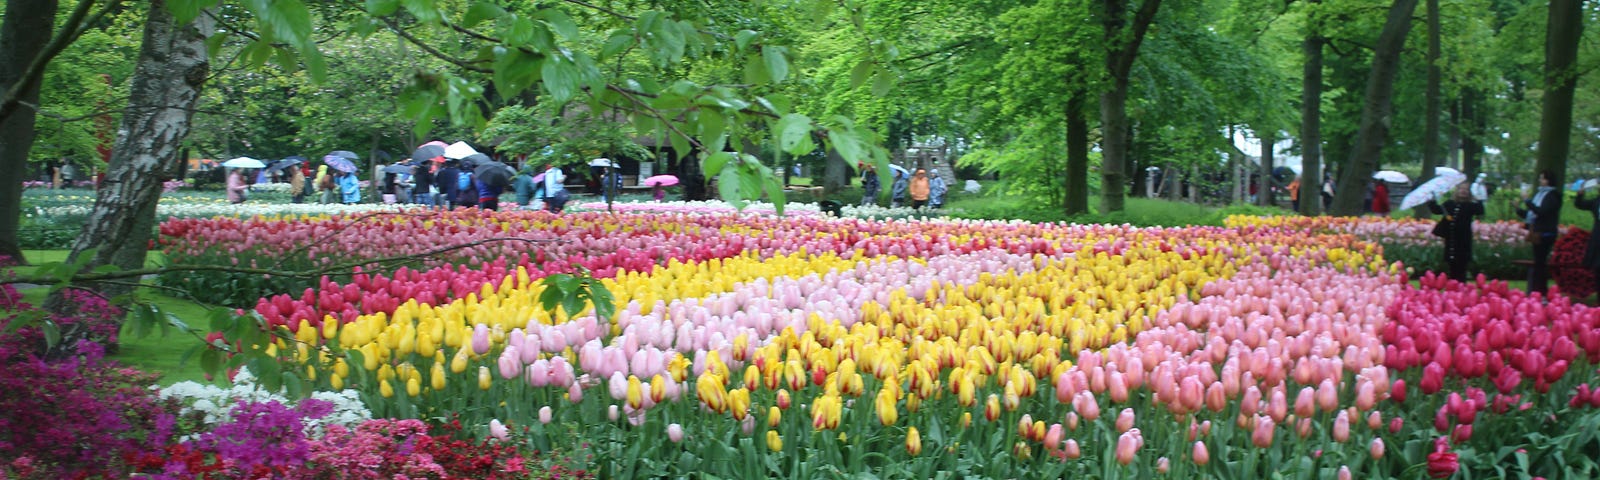 this is a photo of a tulip garden on displayk with people walking behind it with umbrellas up